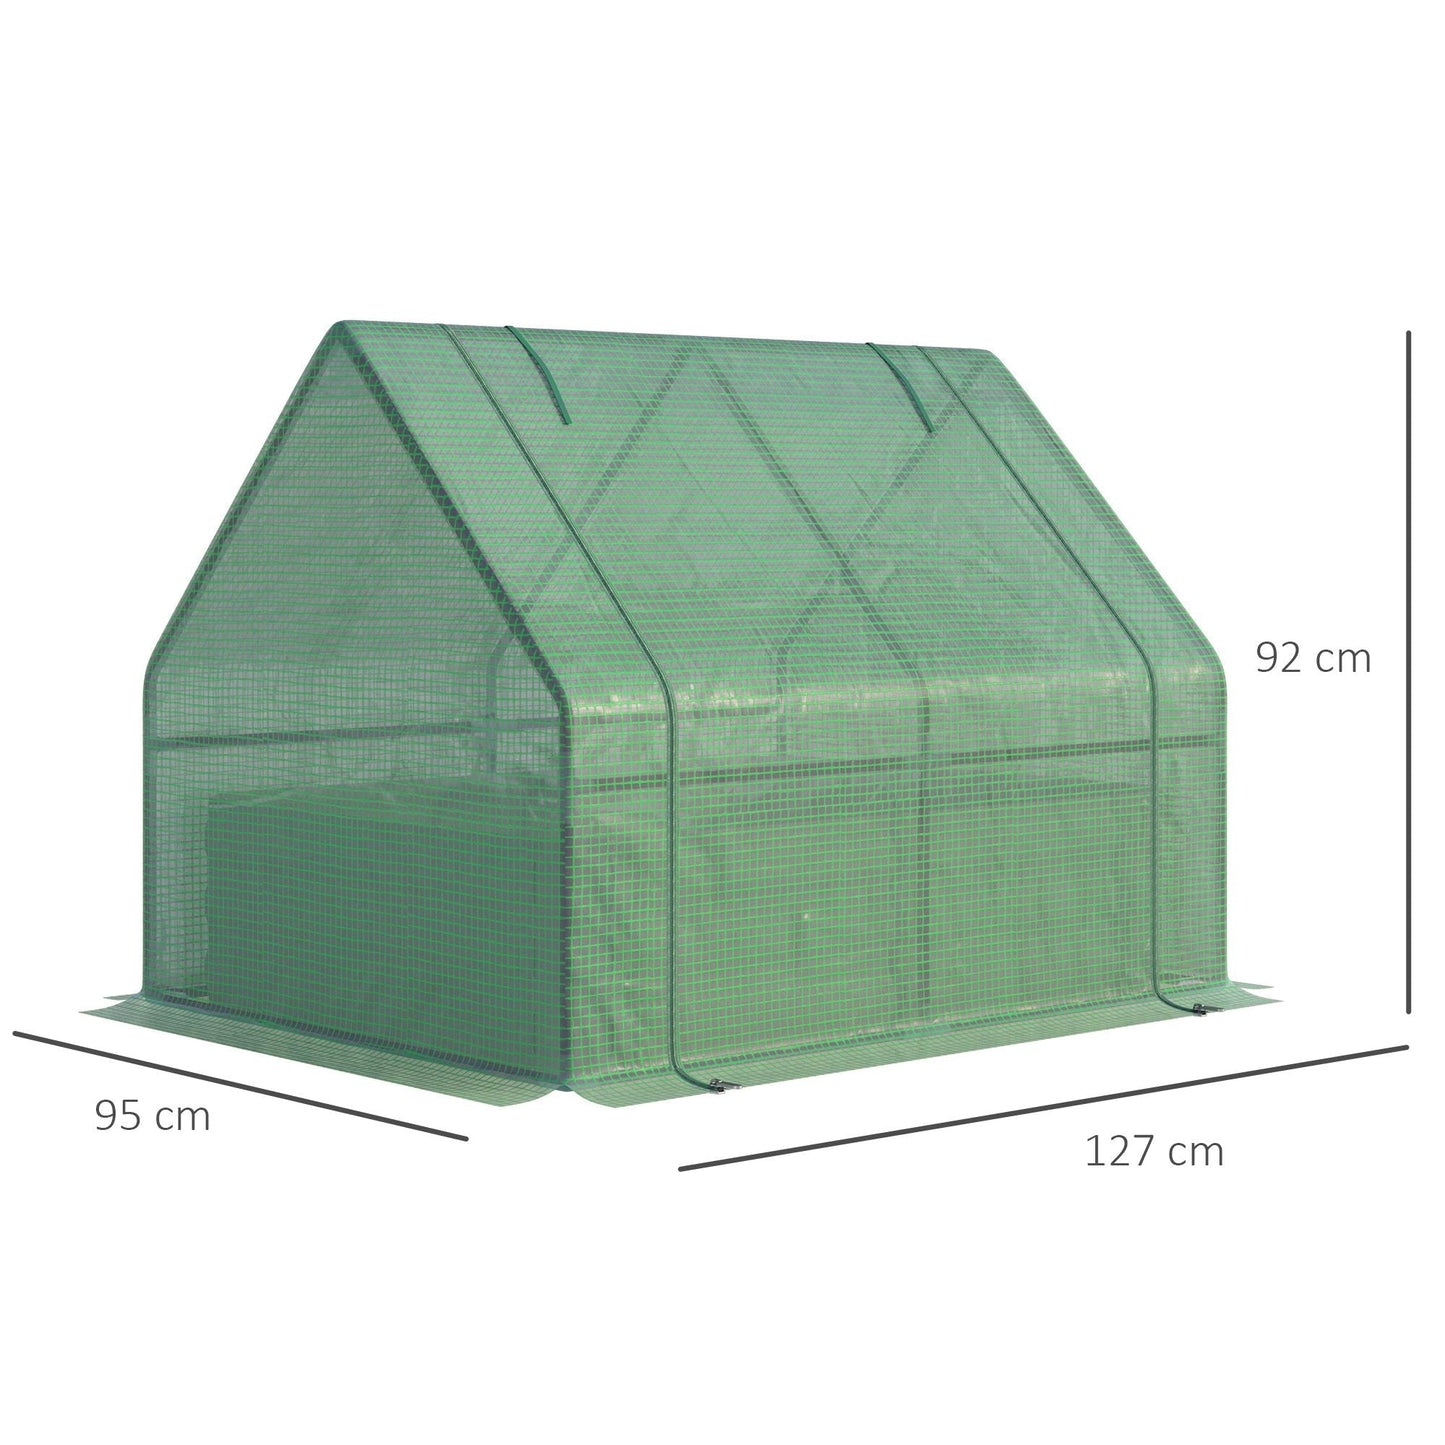 Outsunny Garden Greenhouse Vegetable Bed, Steel with PE Cover, Roller Window, 127x95x92cm